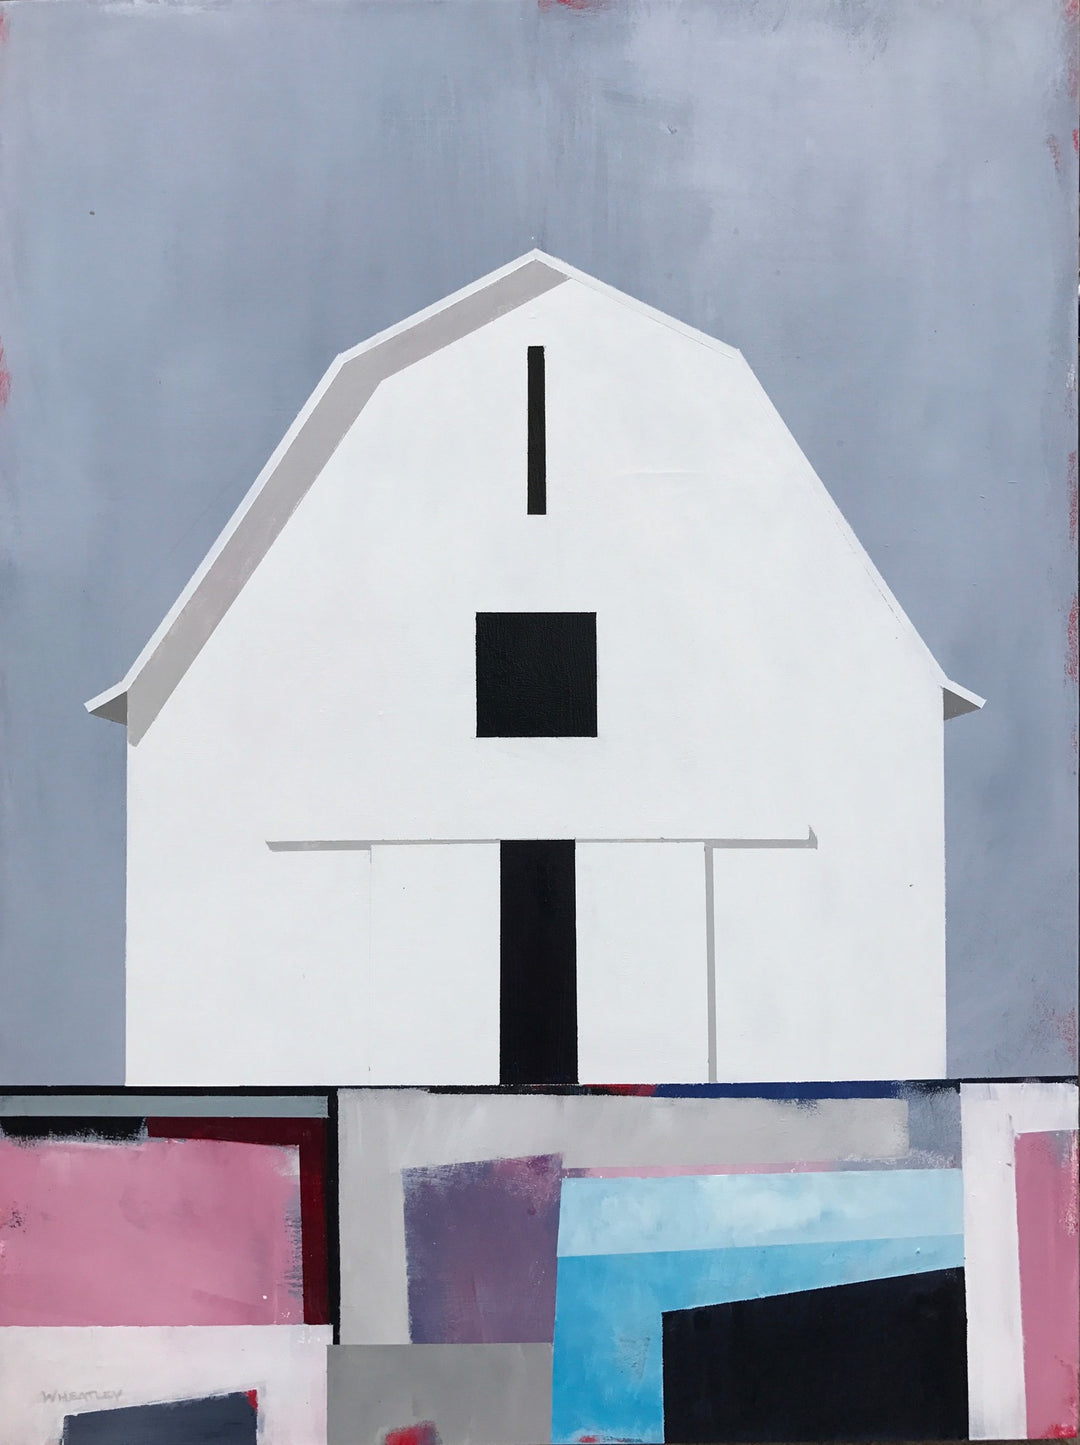 Justin Wheatley - Barn Number 3," an acrylic painting on panel by Justin Wheatley, depicts a white barn with a black door.